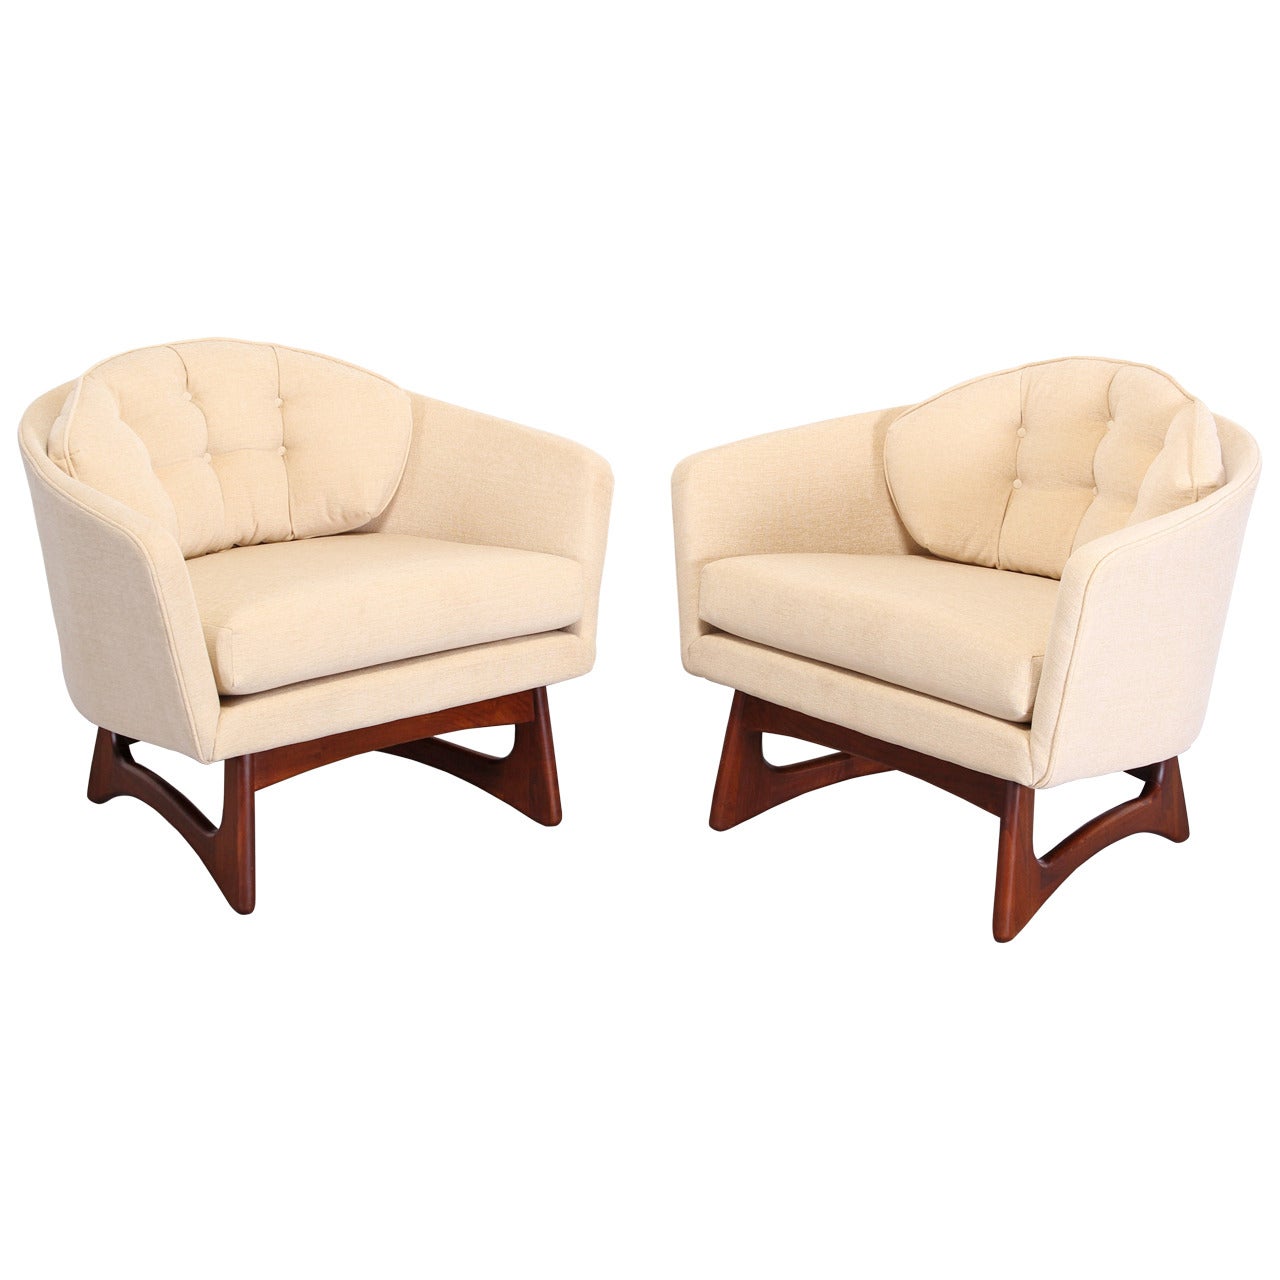 Pair of Adrian Pearsall Lounge or Arm Chairs, 1960